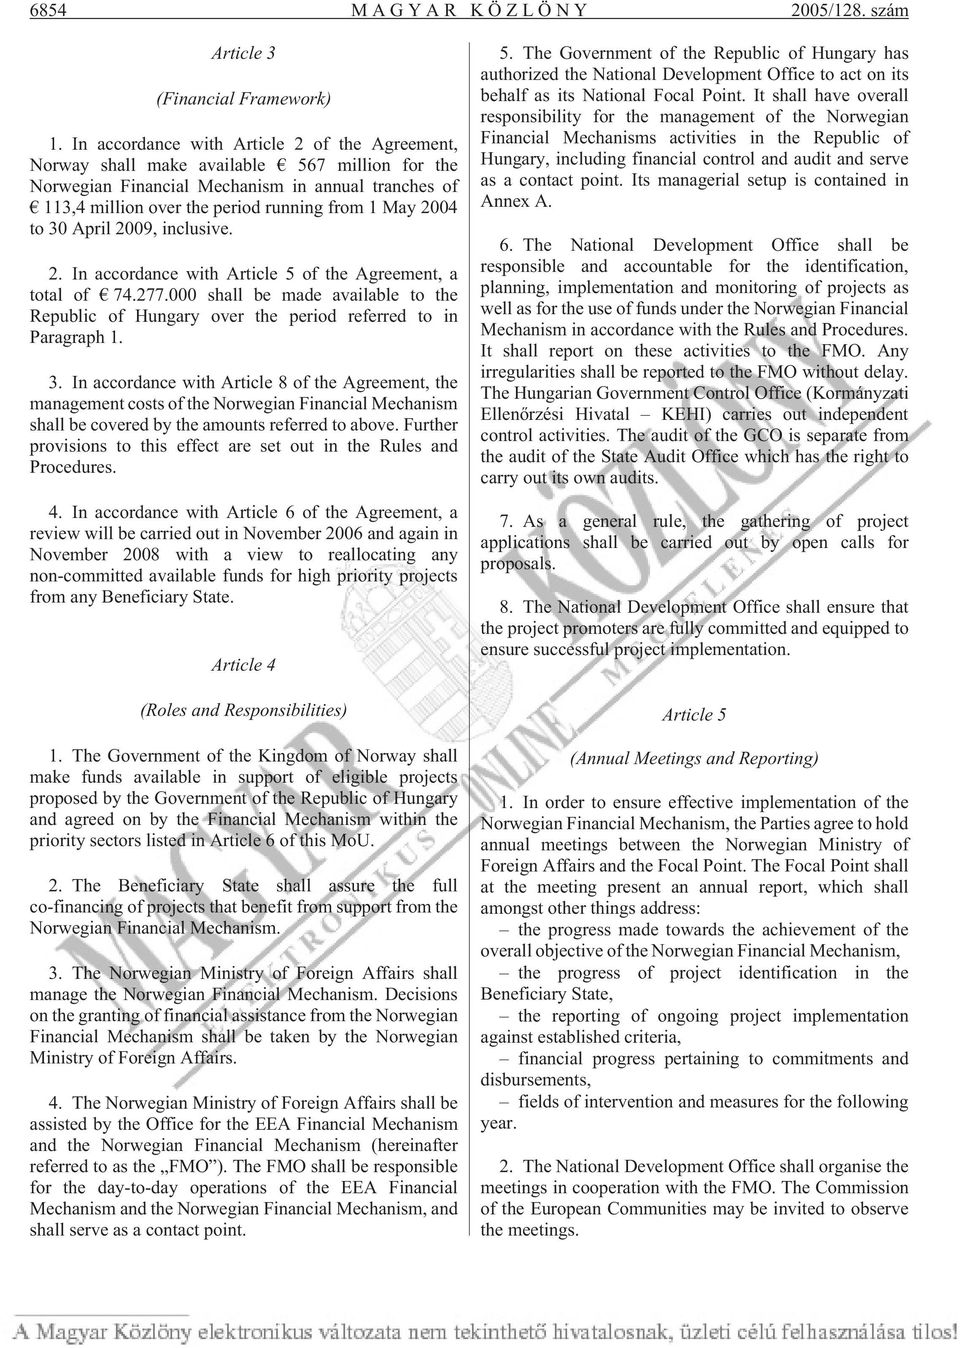 2004 to 30 April 2009, inclusive. 2. In accordance with Article 5 of the Agreement, a total of 74.277.000 shall be made available to the Republic of Hungary over the period referred to in Paragraph 1.